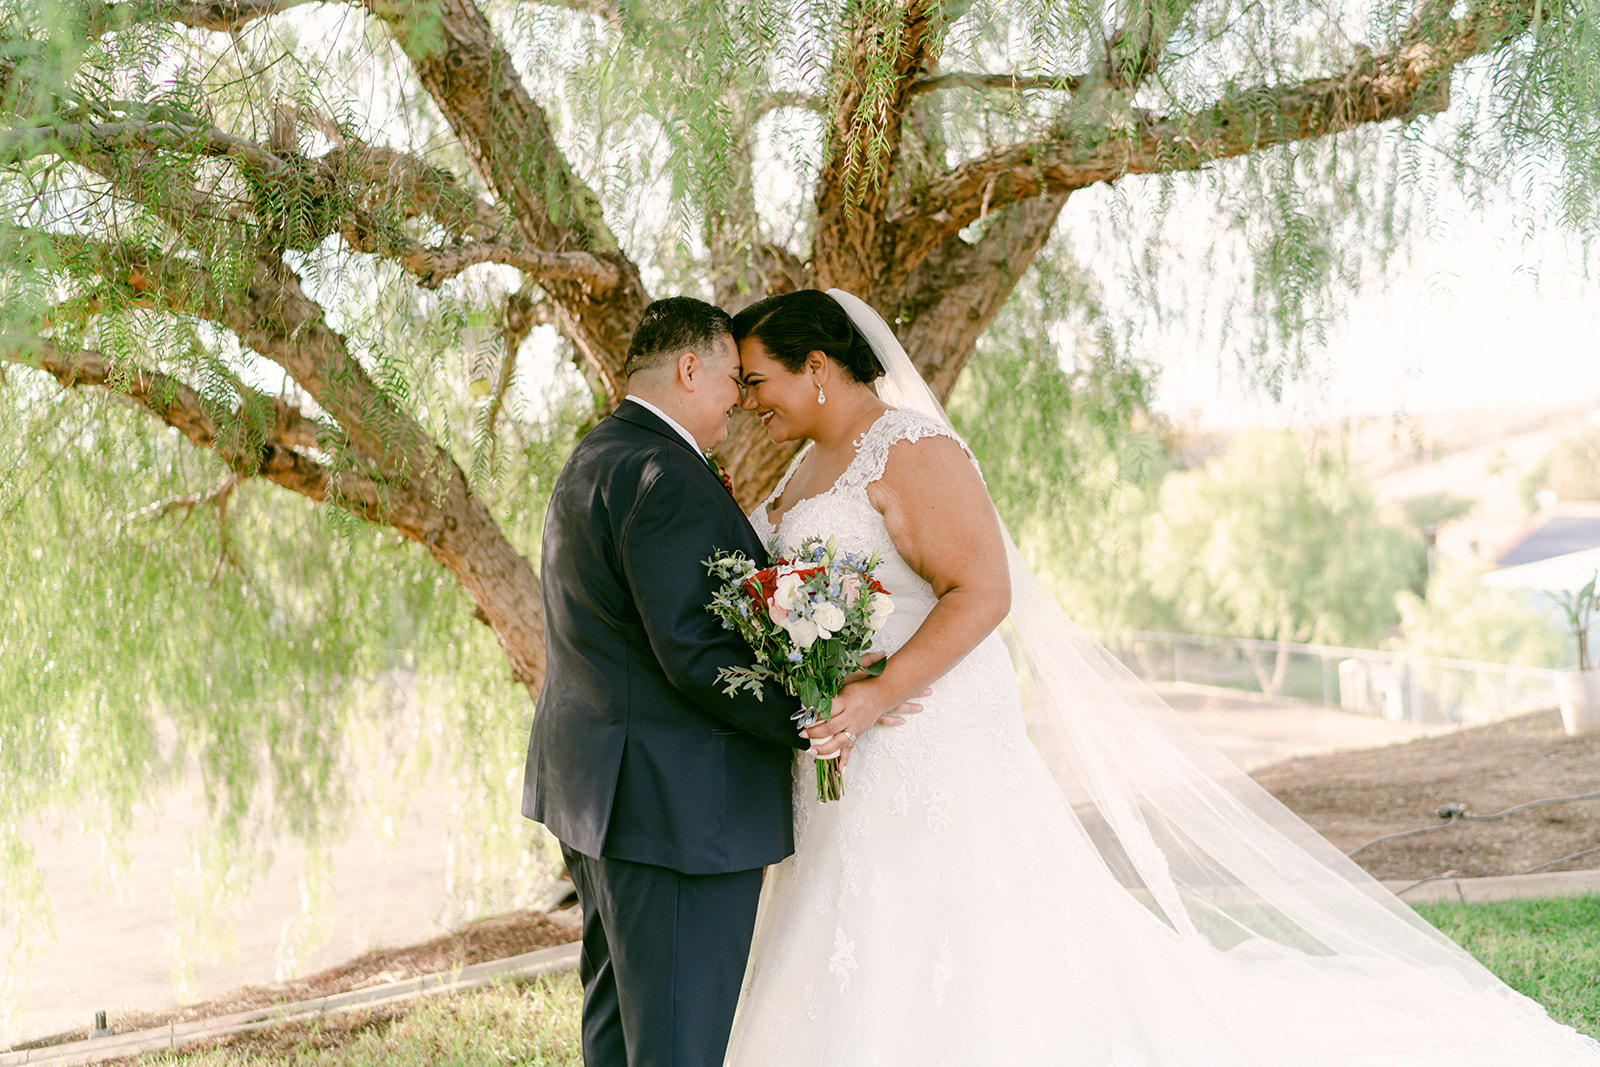 lgtbq wedding photographer, southern california photographer, two brides one love